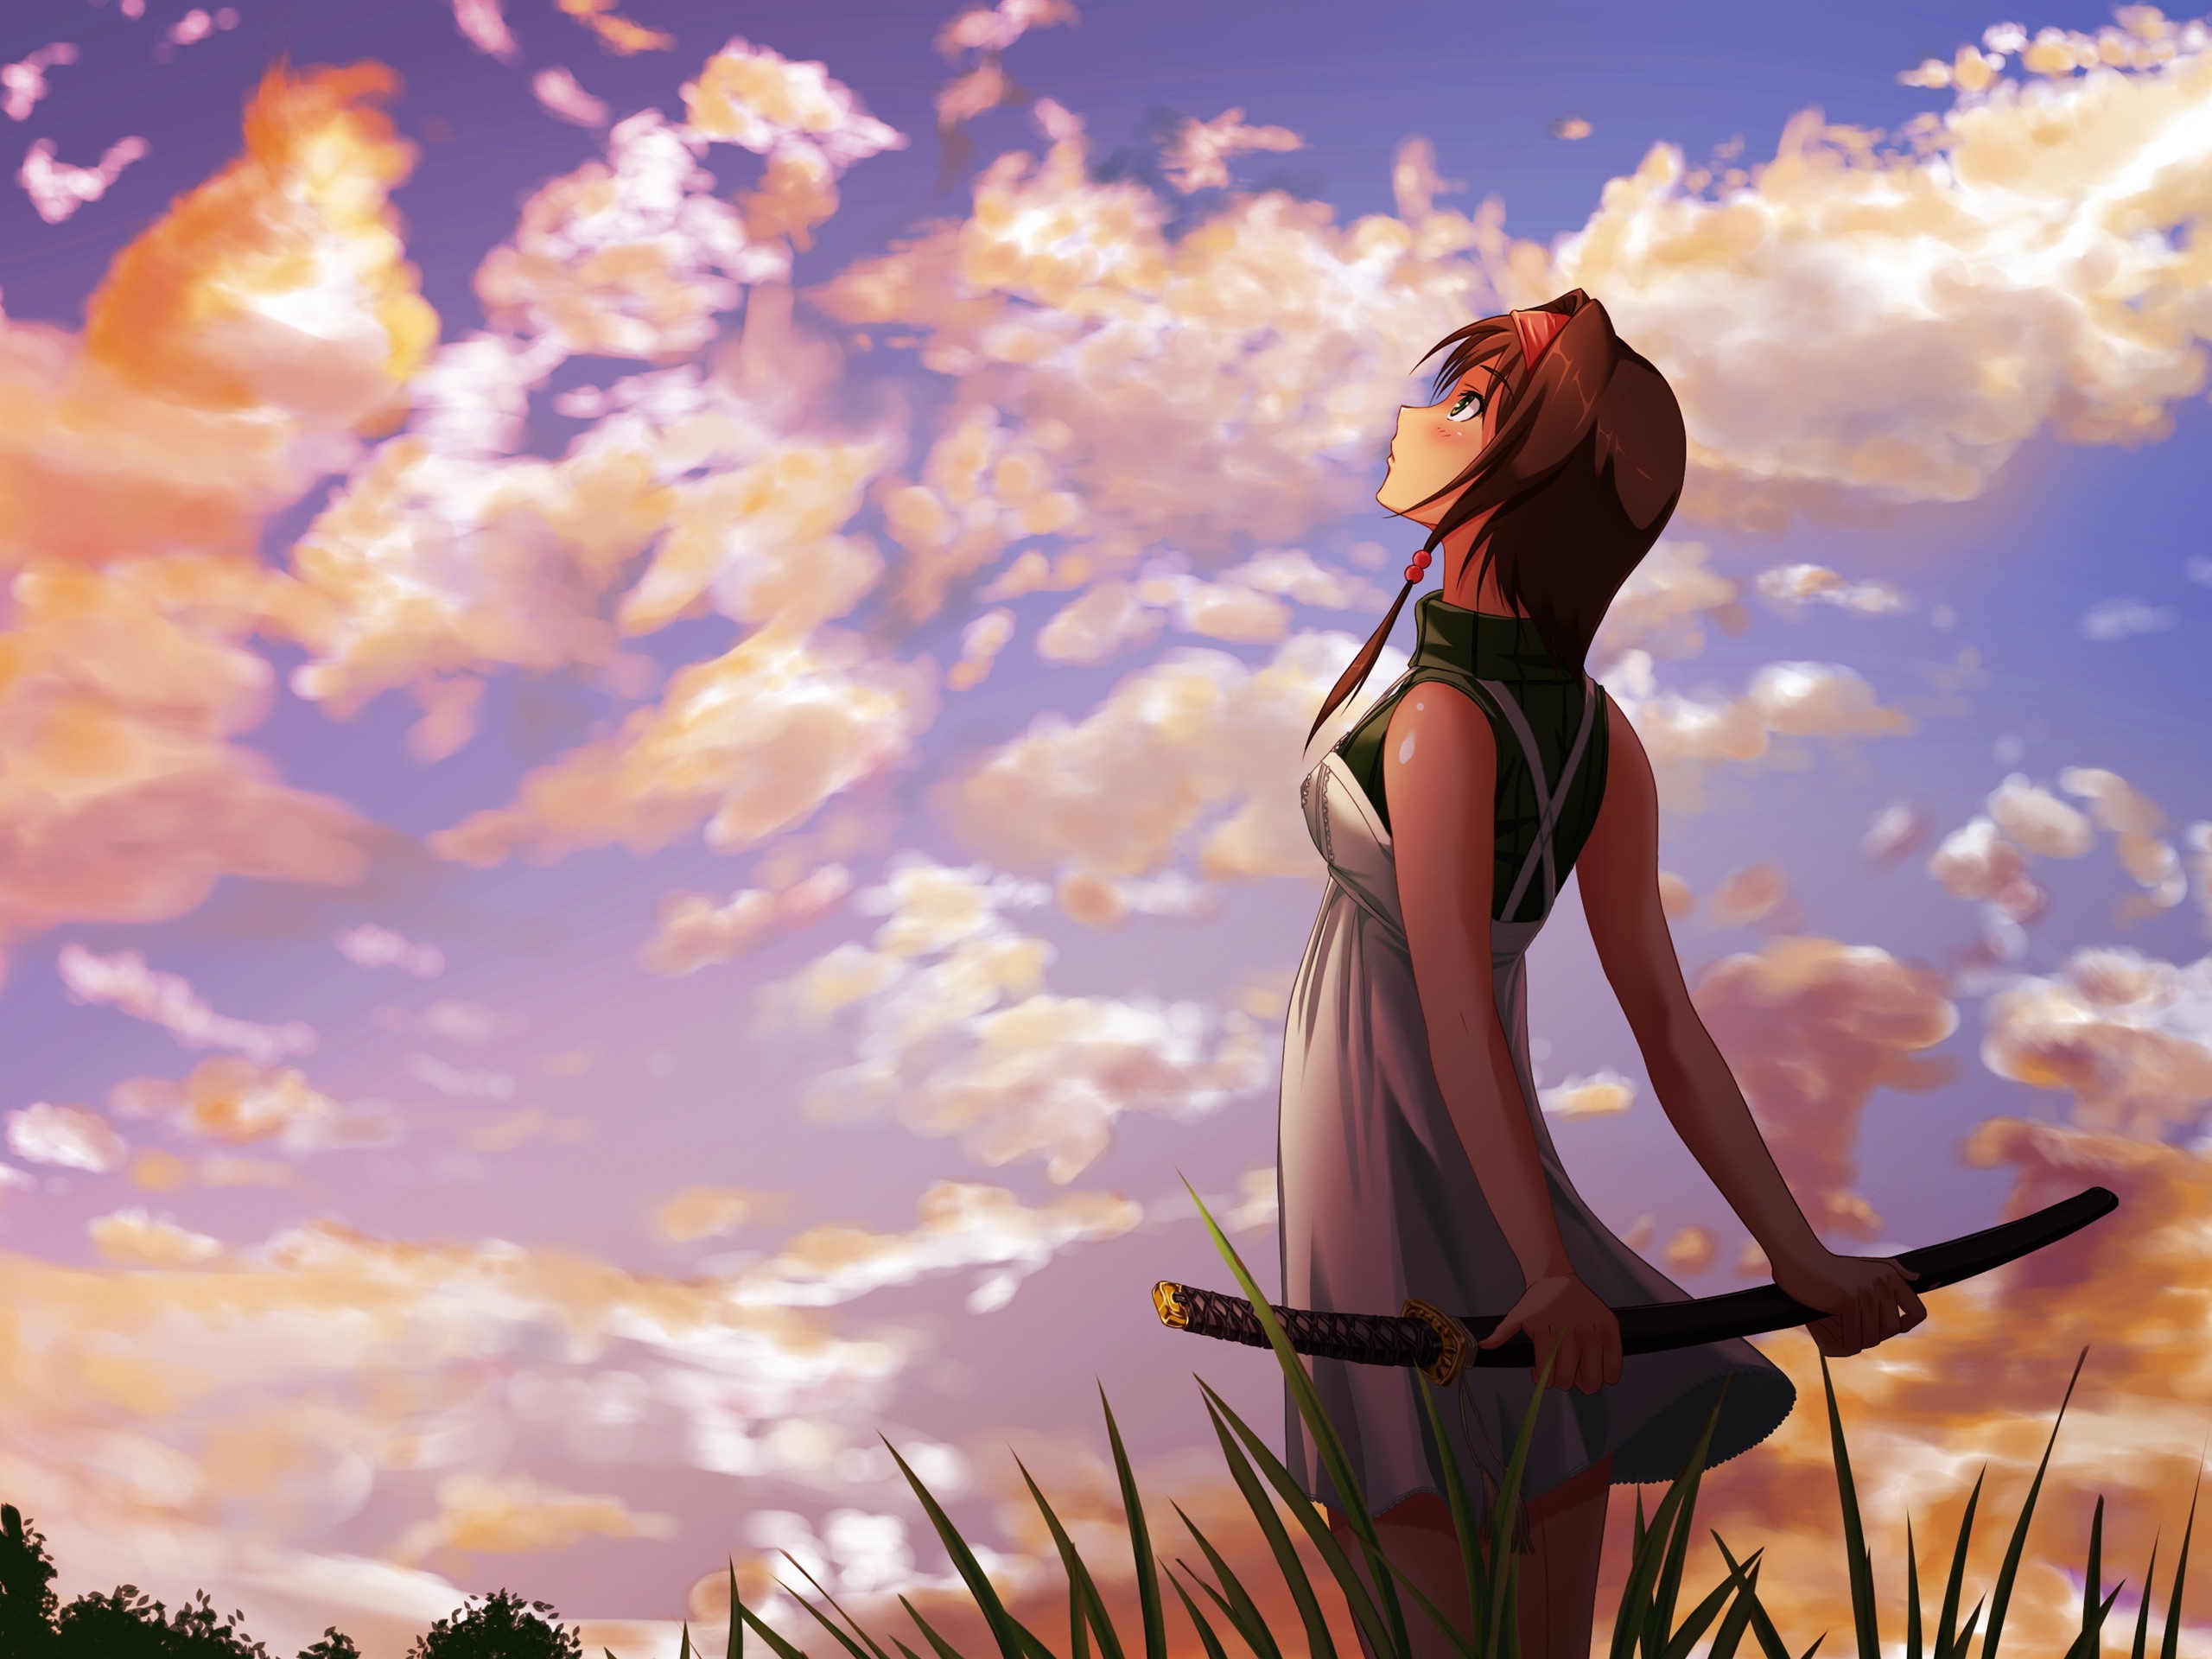 Wallpaper anime girl look at sky katana clouds sunset x hd picture image